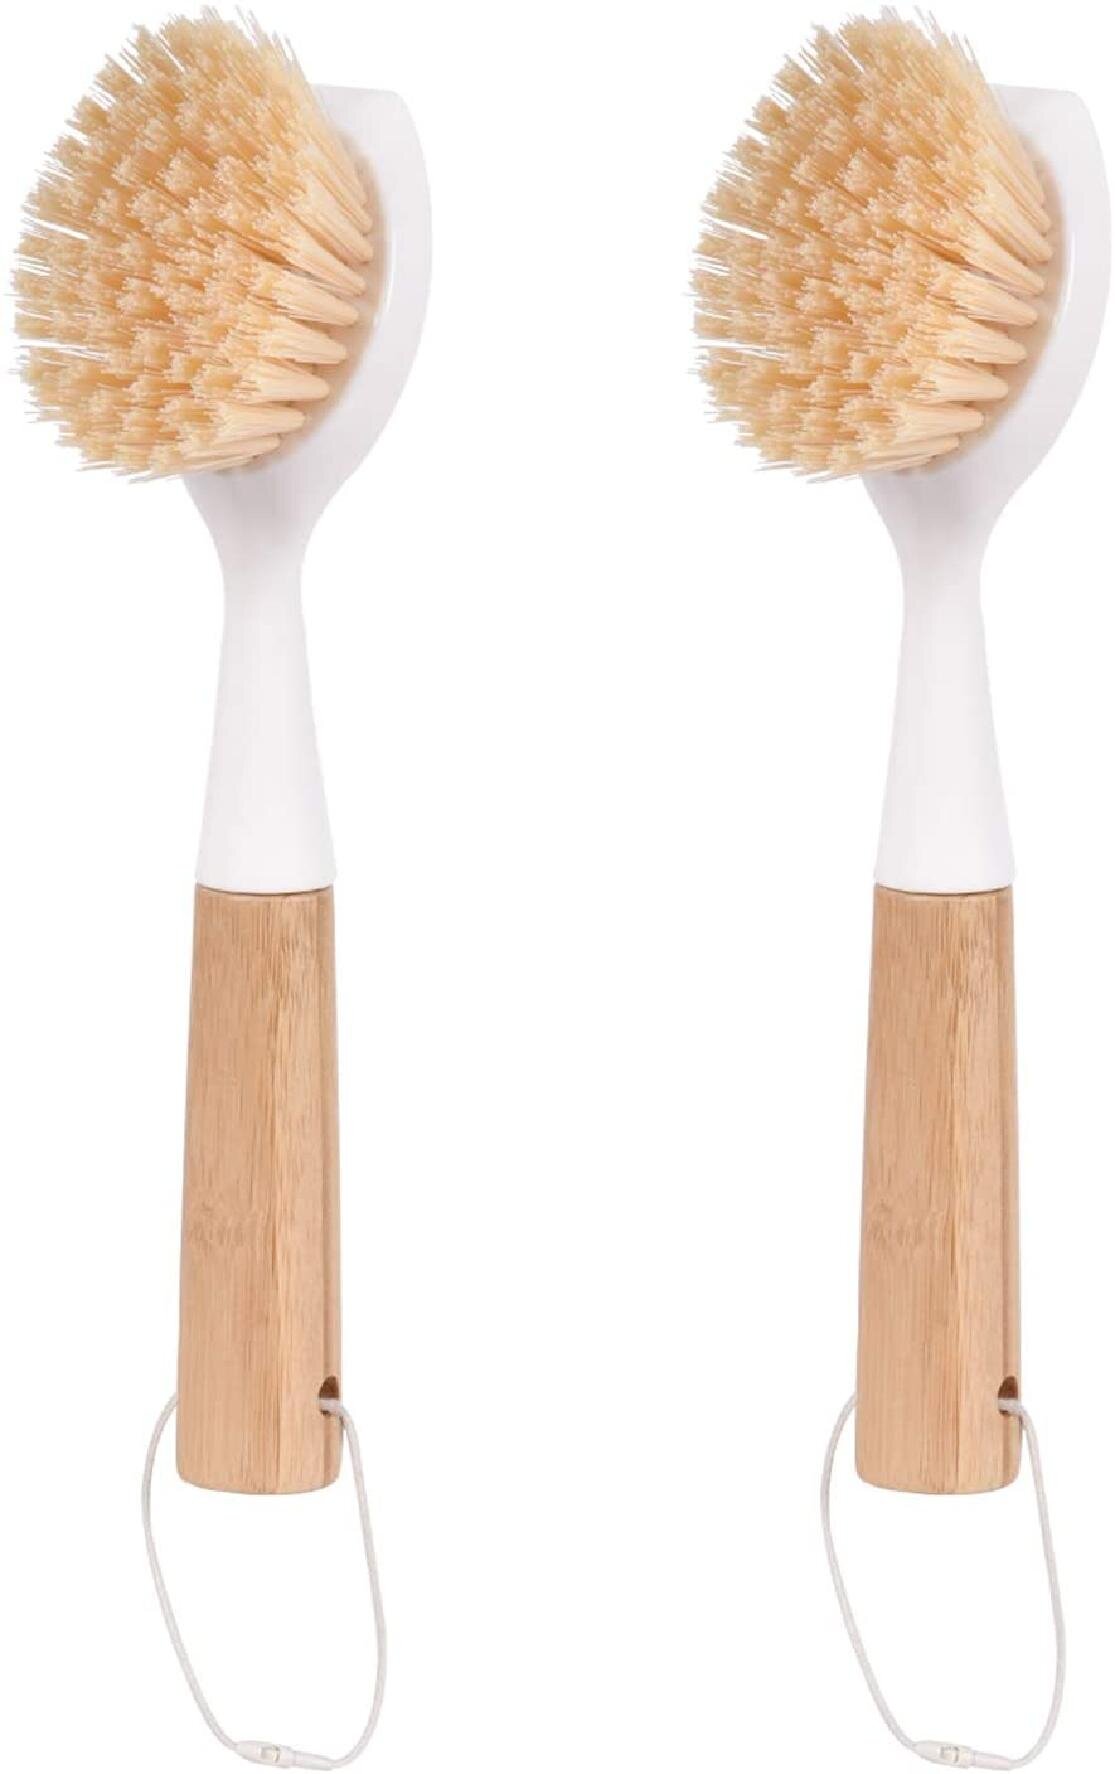 Bendable Stiff Bristles Heavy Duty Scrub Brush Cleaning Scrubber for Sink Stove 